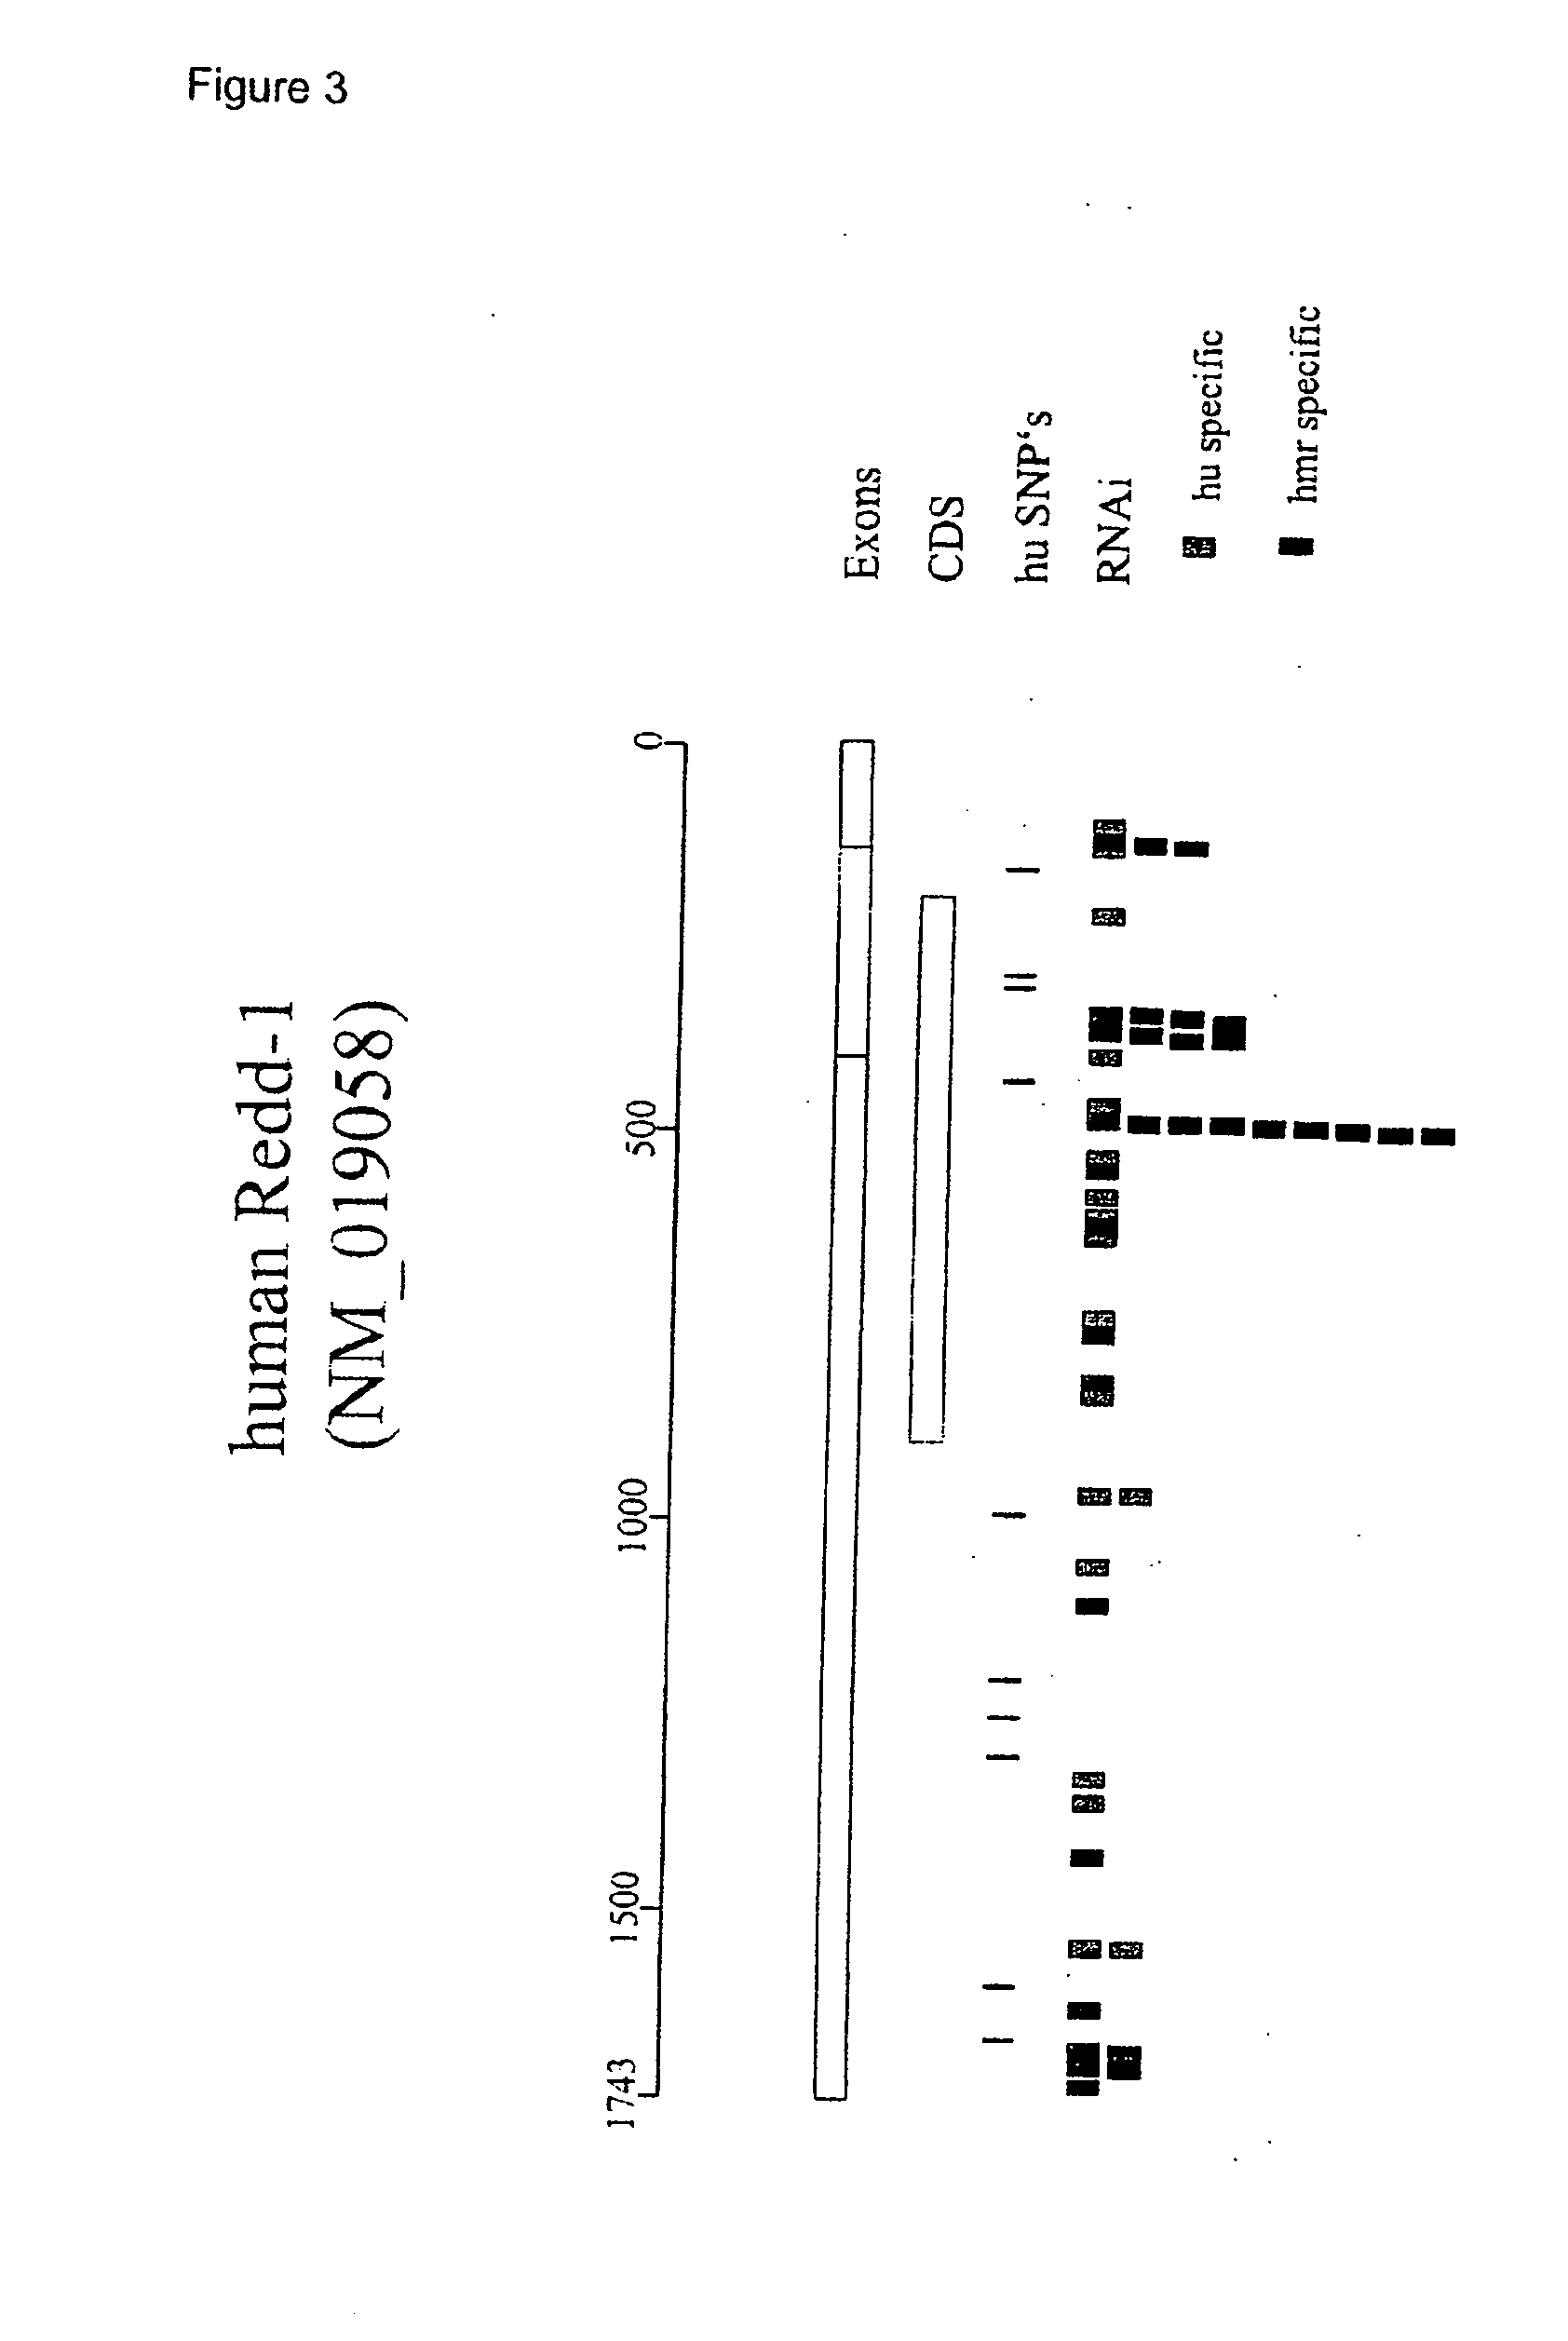 Therapeutic uses of inhibitors of RTP801